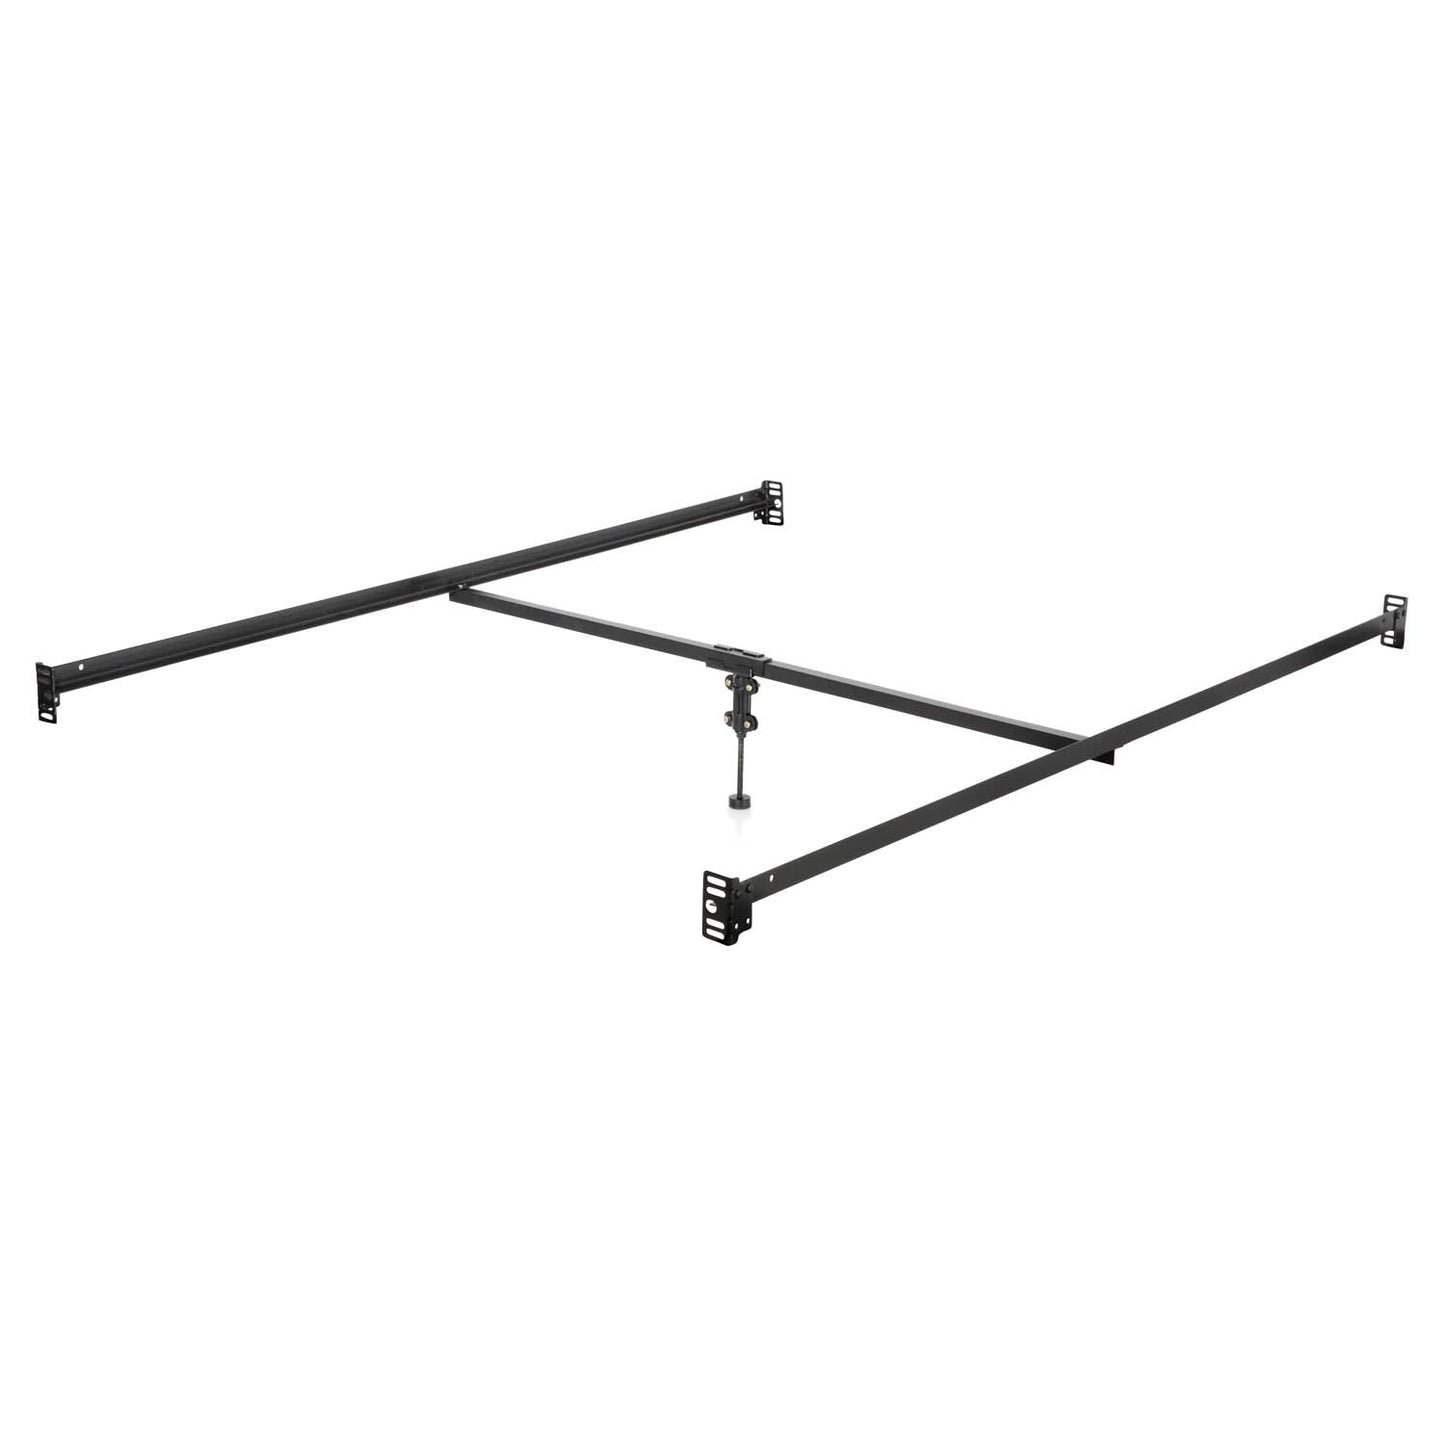 Bolt-on Bed Rail System with Center Bar Support